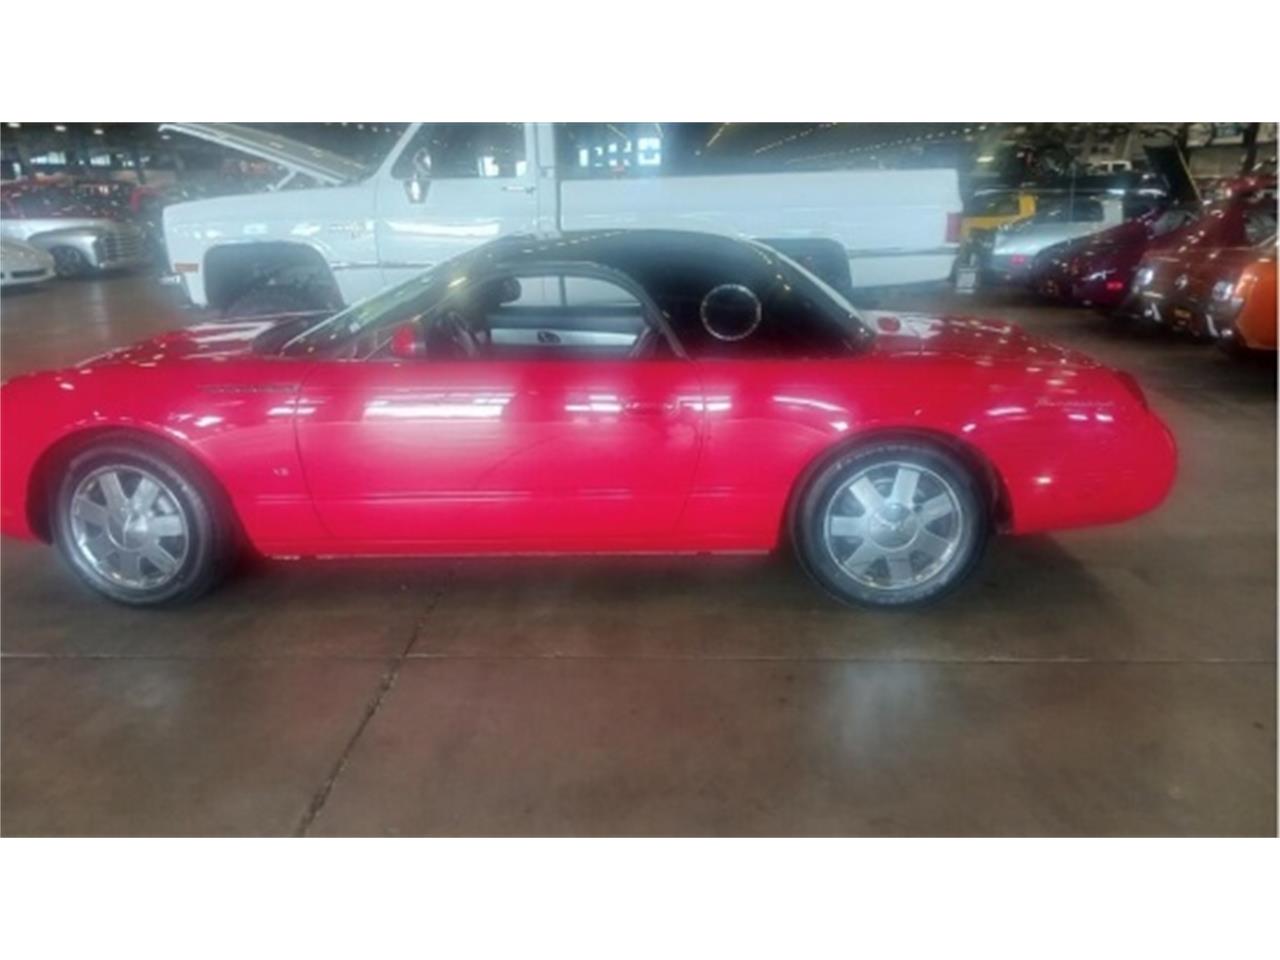 For Sale at Auction: 2003 Ford Thunderbird in Shawnee, Oklahoma for sale in Shawnee, OK